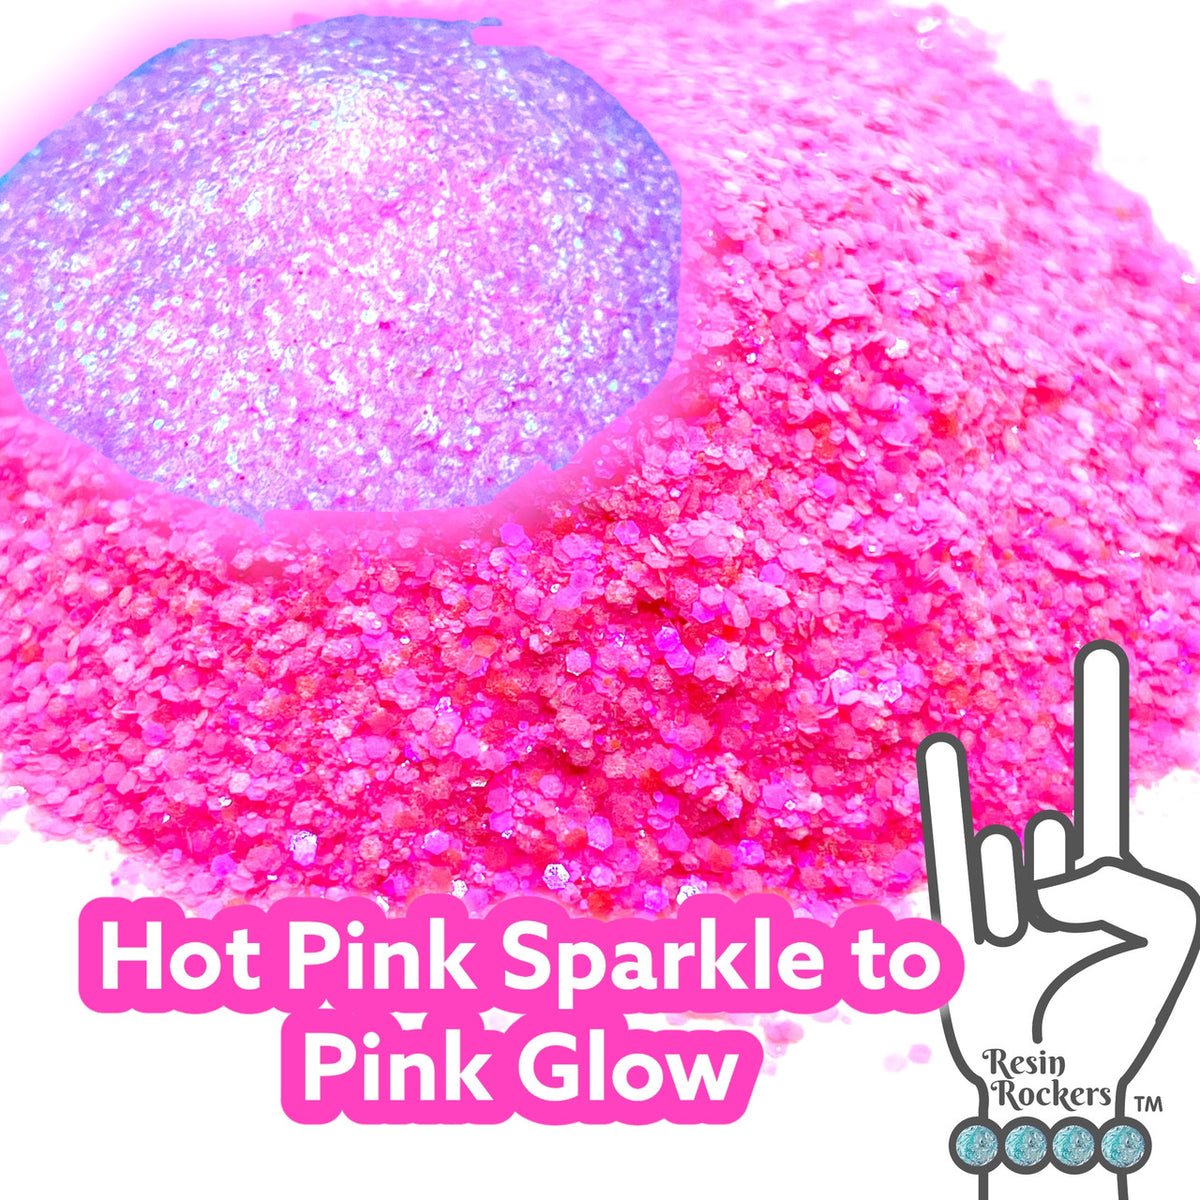 Glamour and Hot Pink Sparkle to Pink Glow in the Dark Pixie for Poxy Medium Chunky Glitter Mix